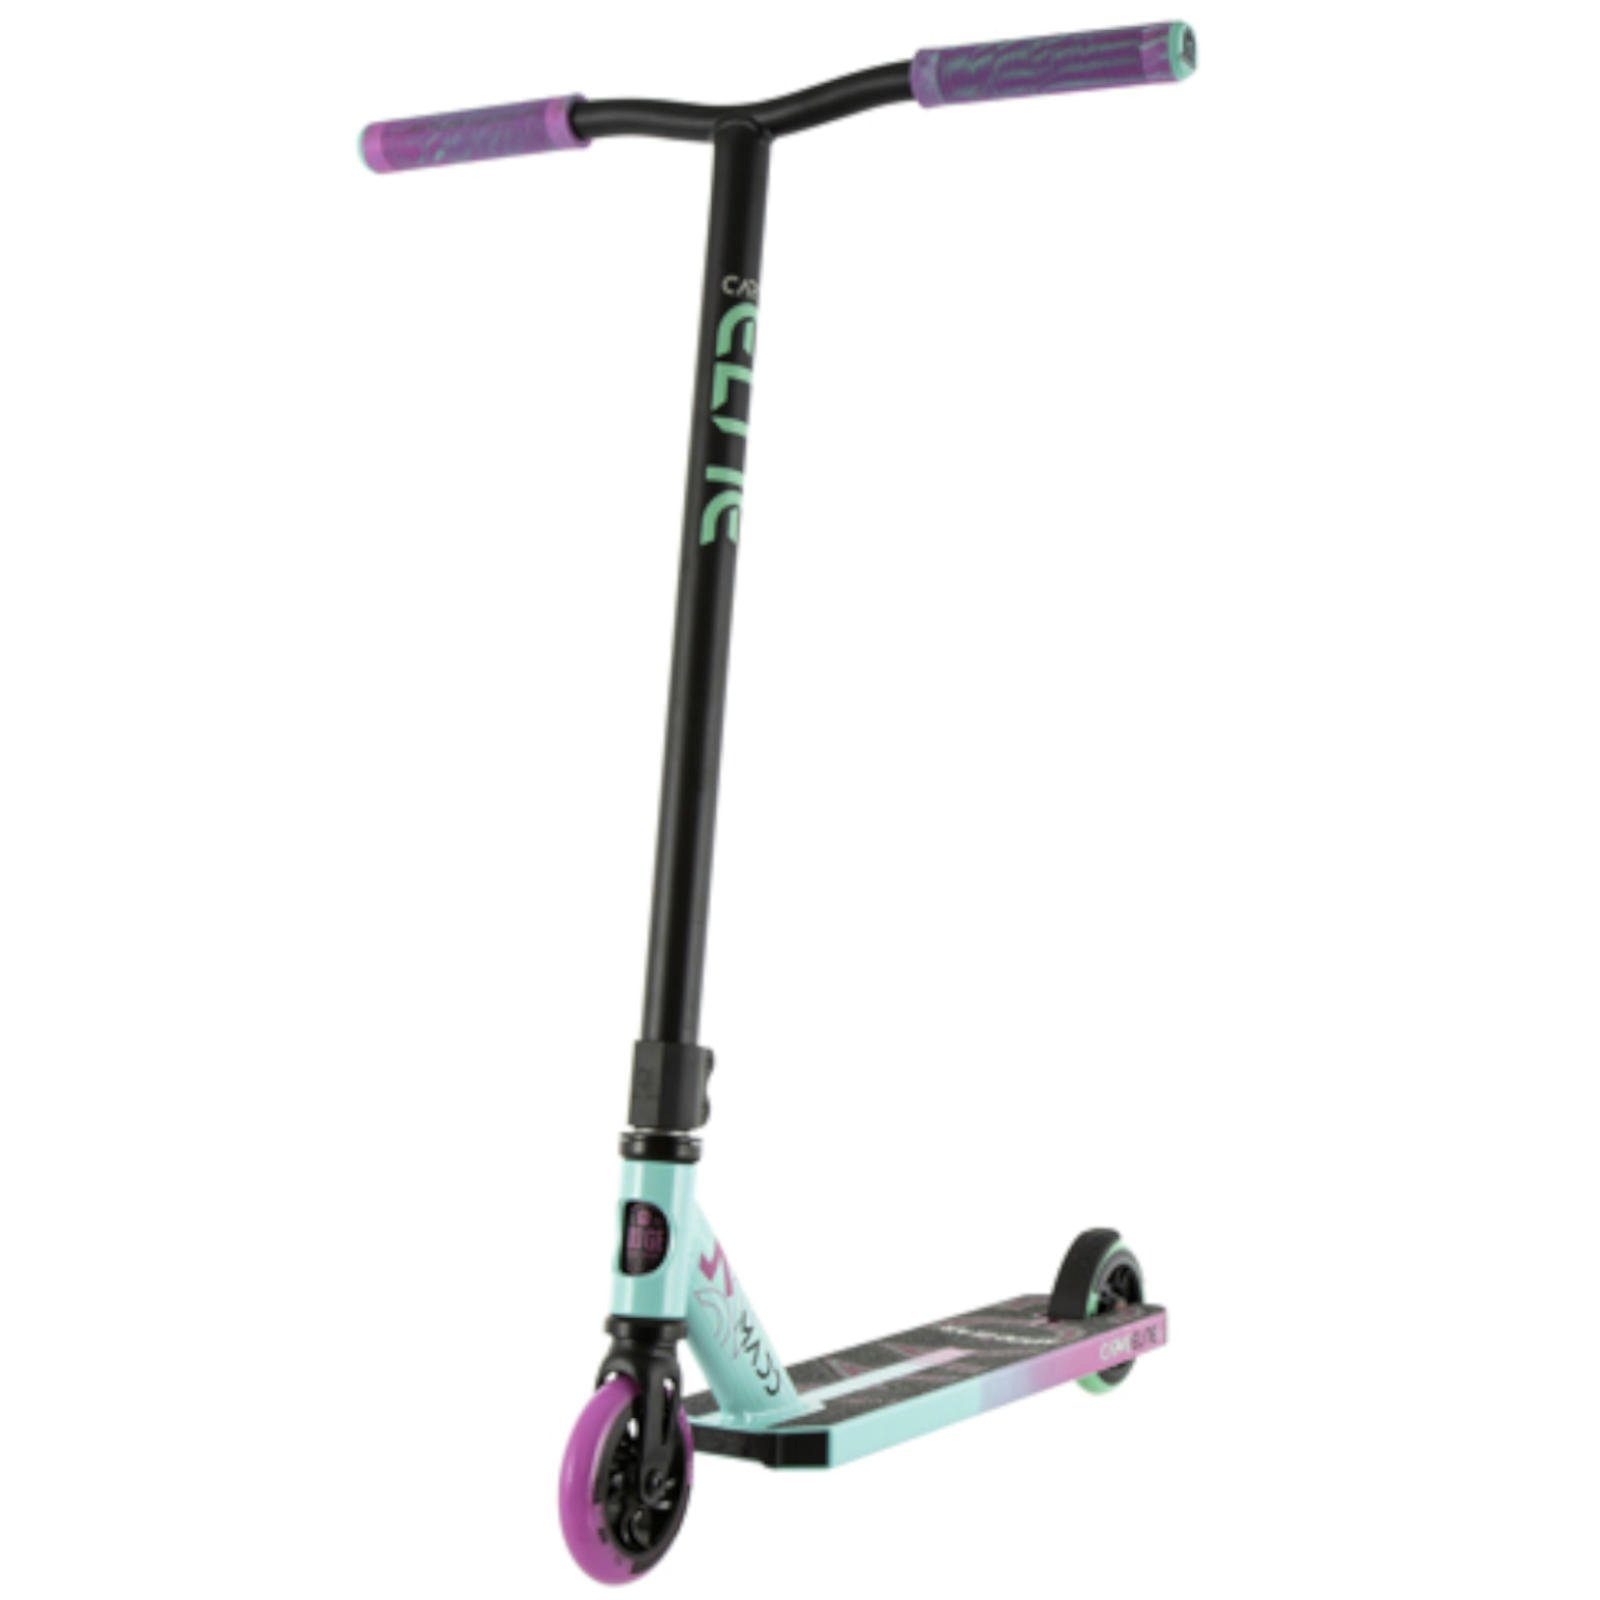 Scooter Teal Pink Madd